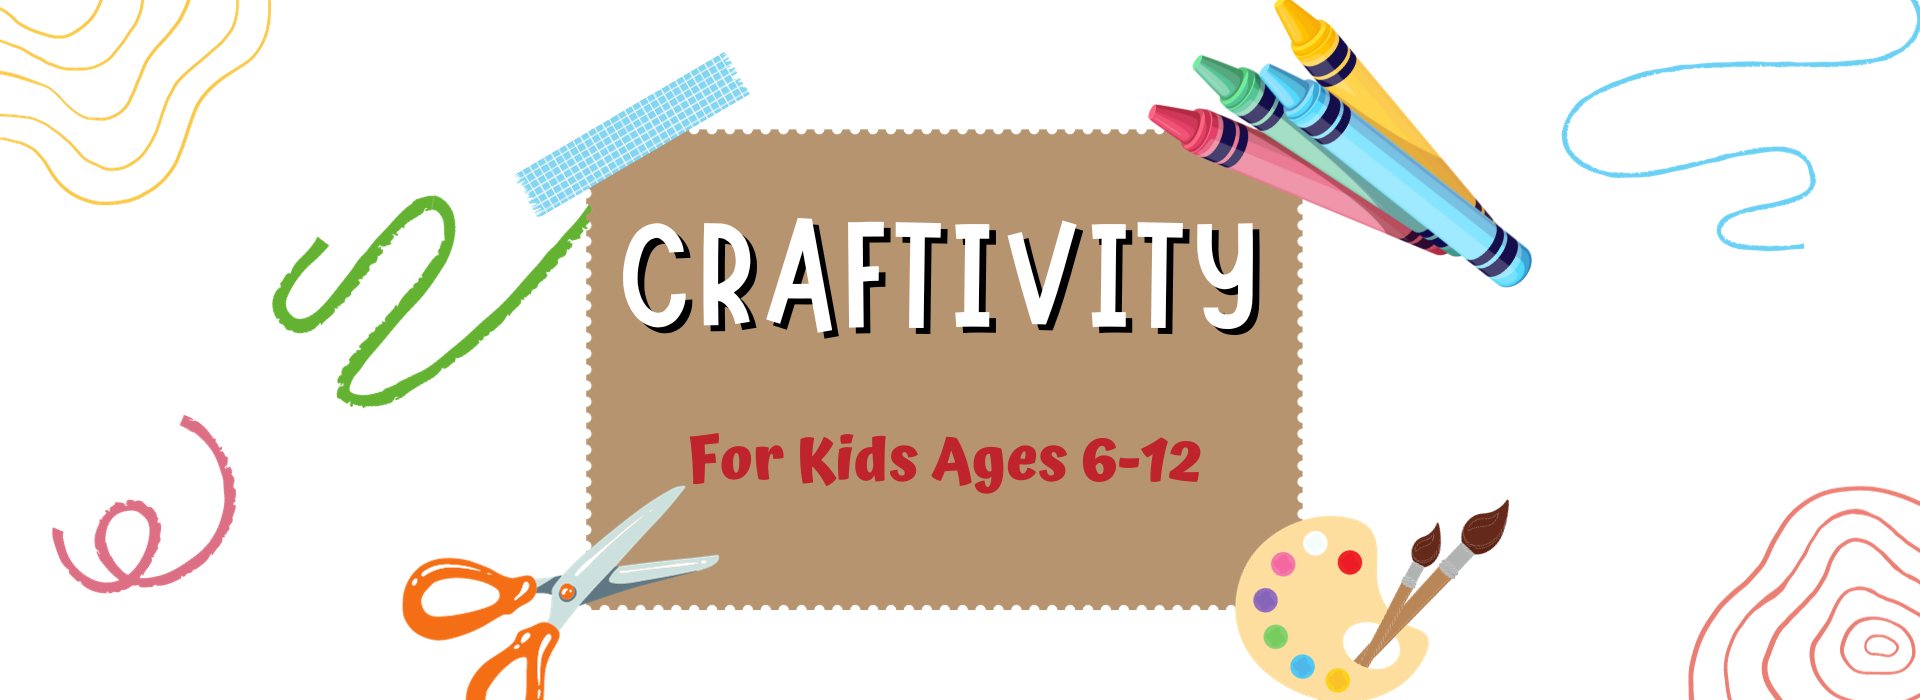 Craftivity Tuesday, April 2nd at 4pm for kids ages 6-12